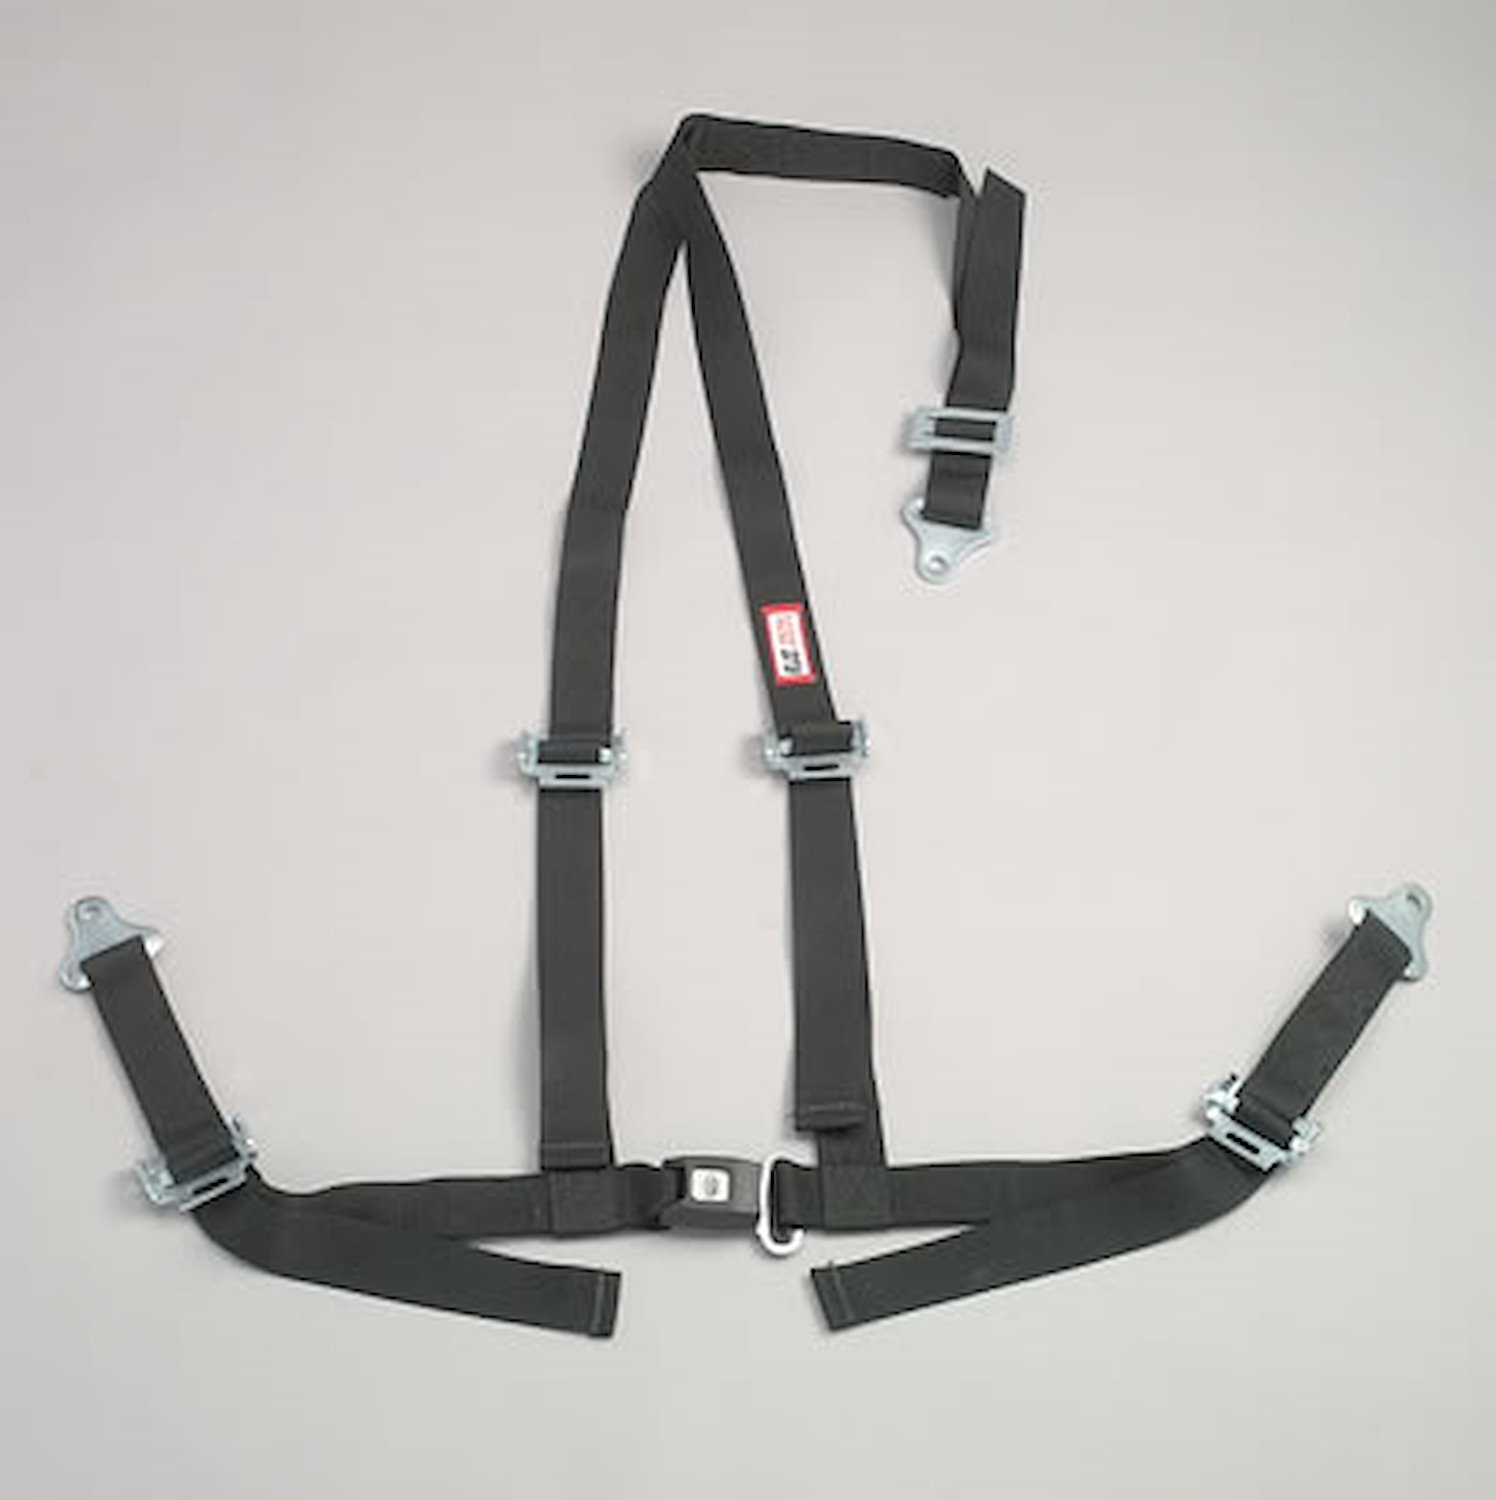 NON-SFI B&T HARNESS 2 PULL UP Lap Belt SNAP 2 S. H. V ROLL BAR Mount BOLT w/STERNUM STRAP YELLOW